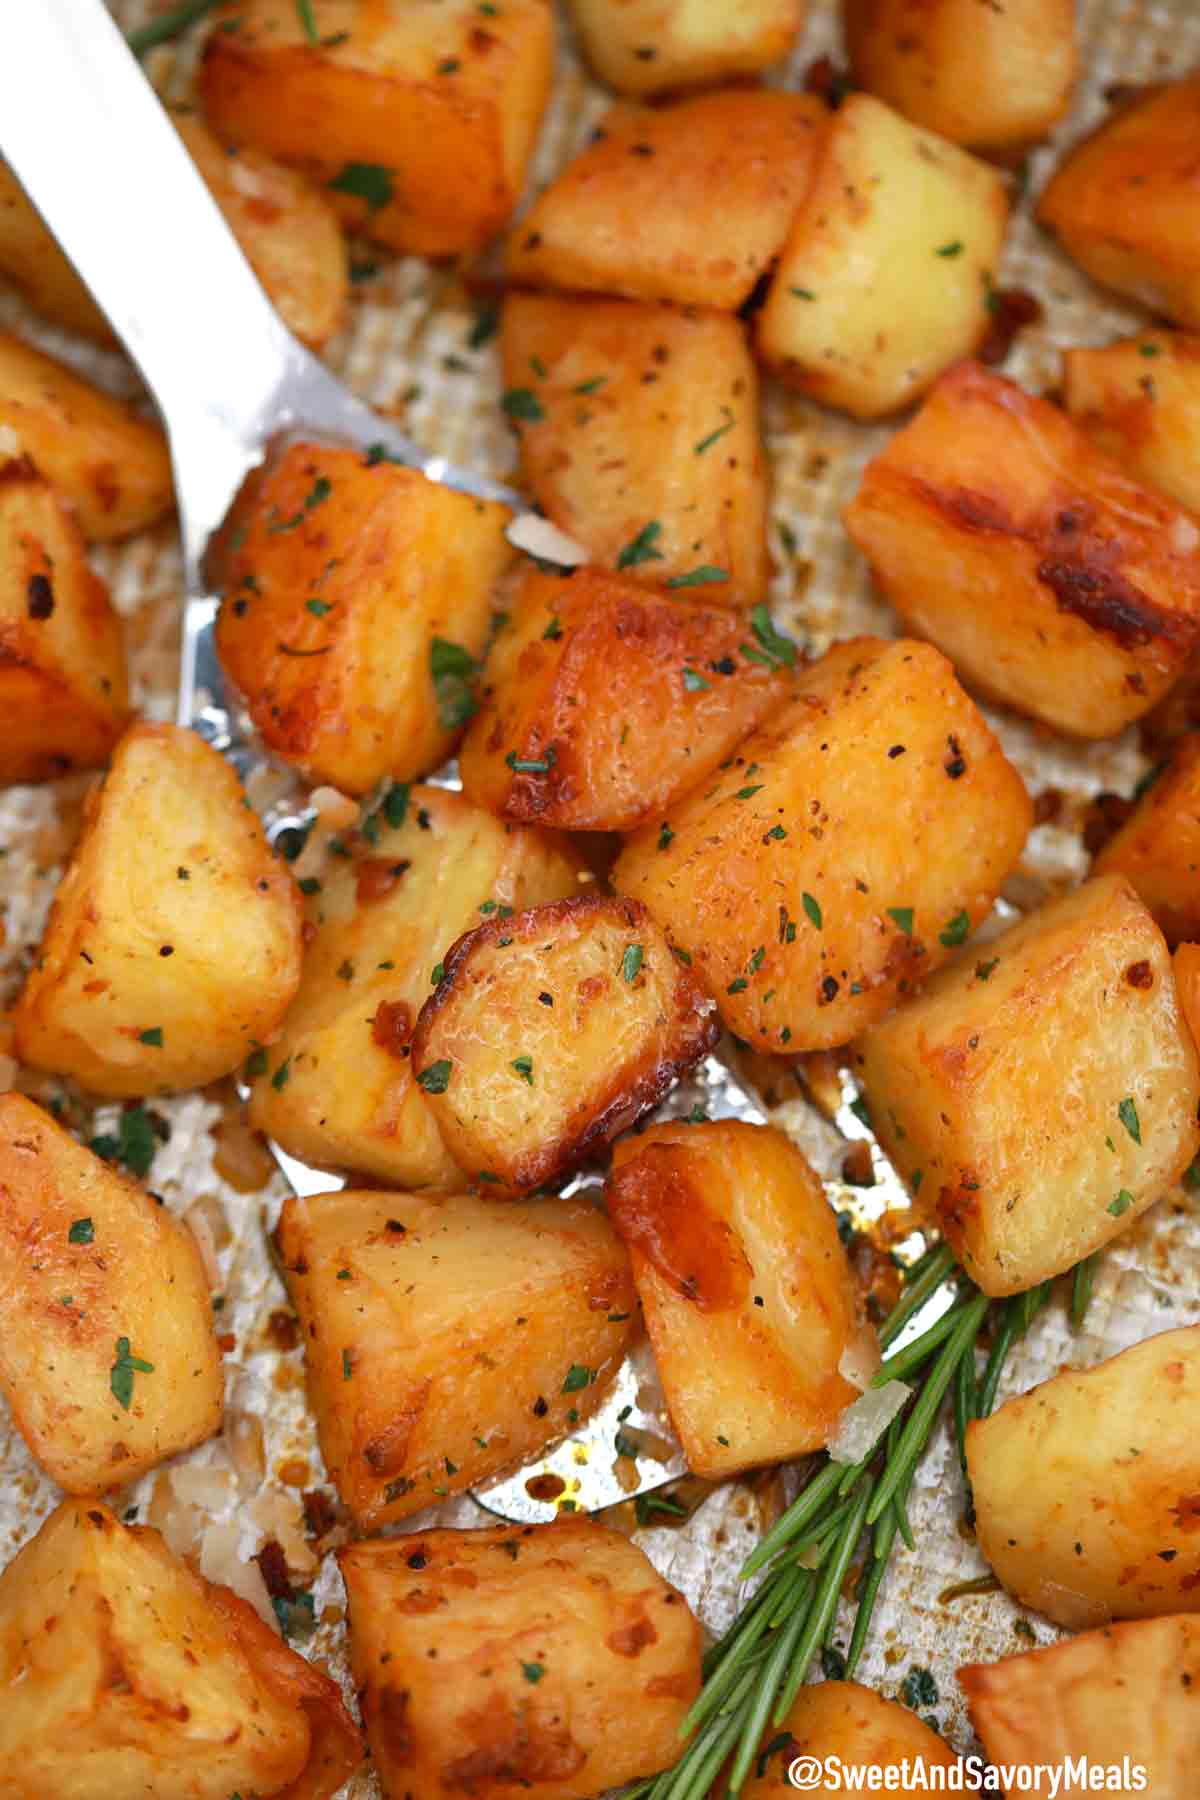 Garlic Roasted Potatoes Recipe [Video] - Sweet and Savory Meals